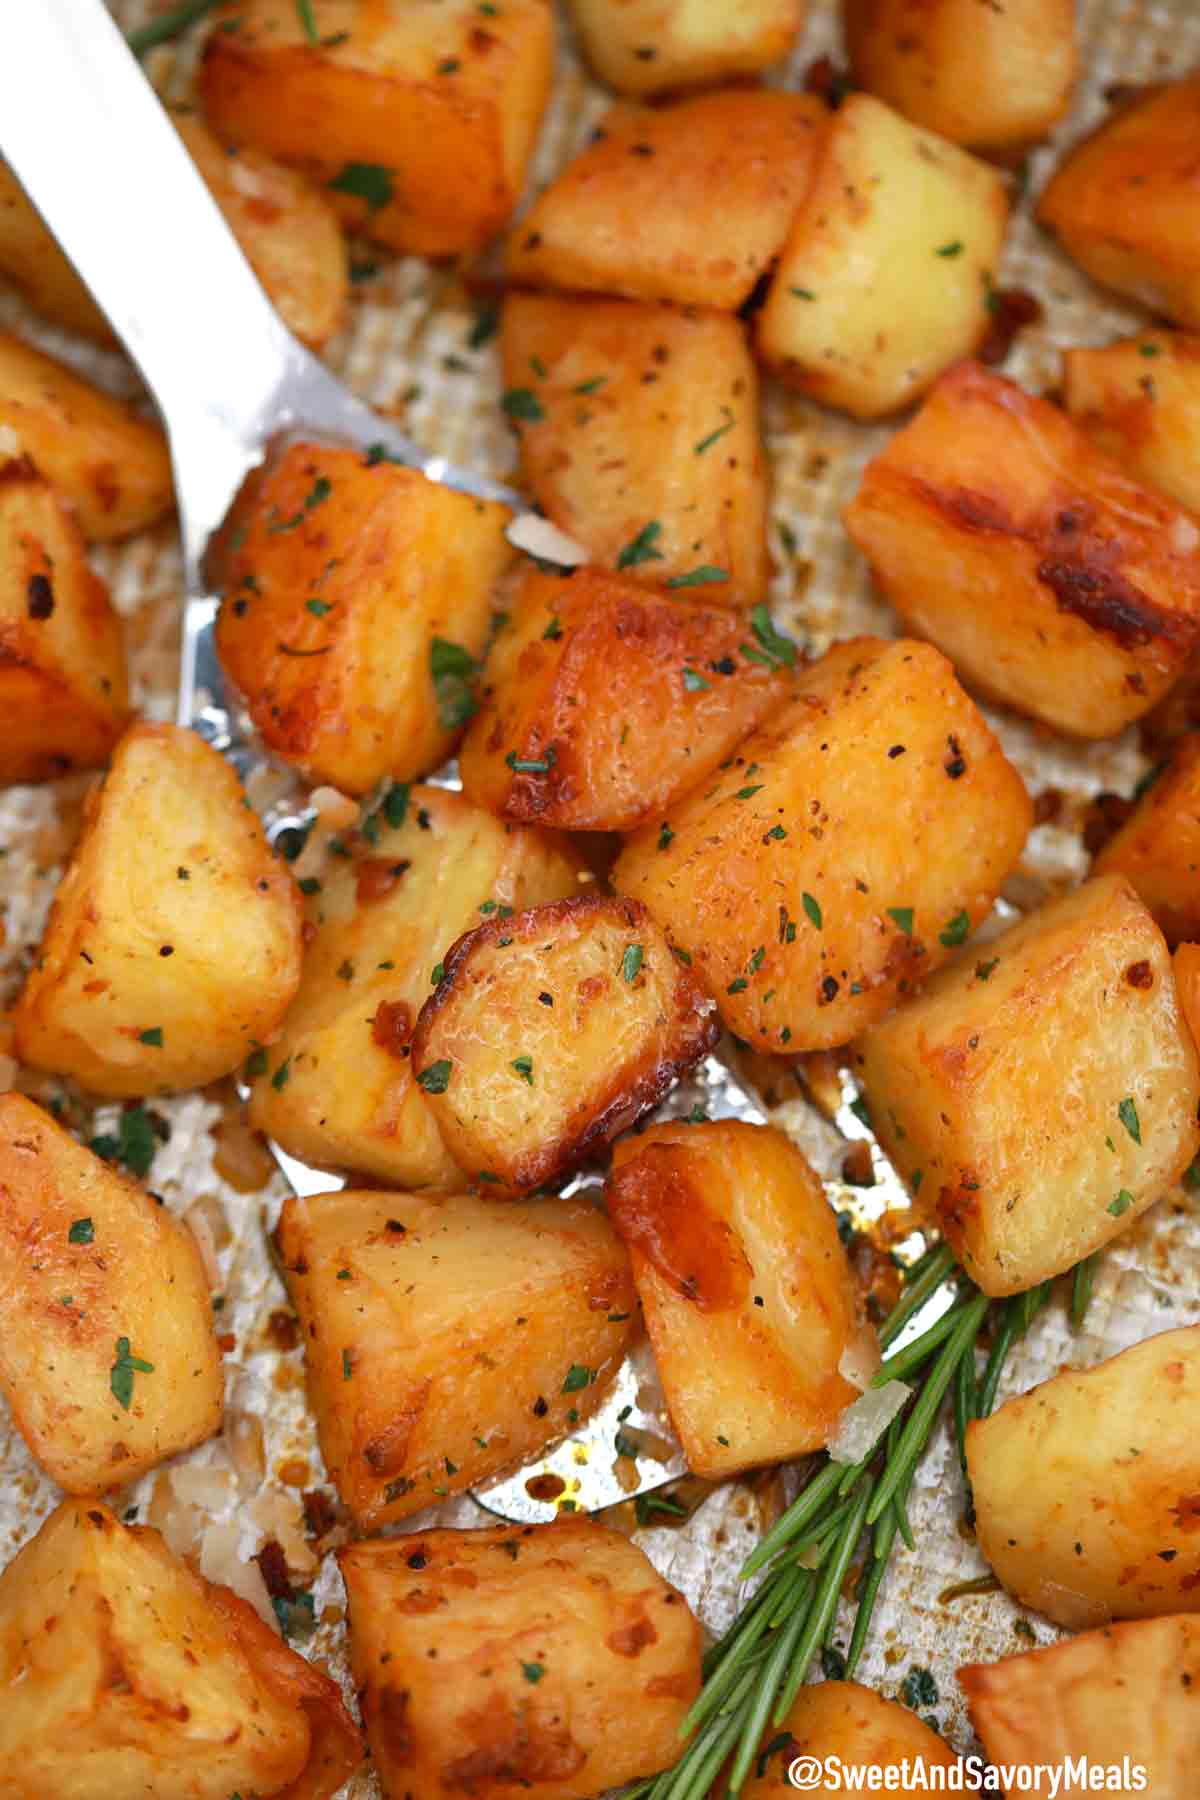 Garlic Roasted Potatoes Recipe [Video] - Sweet and Savory Meals